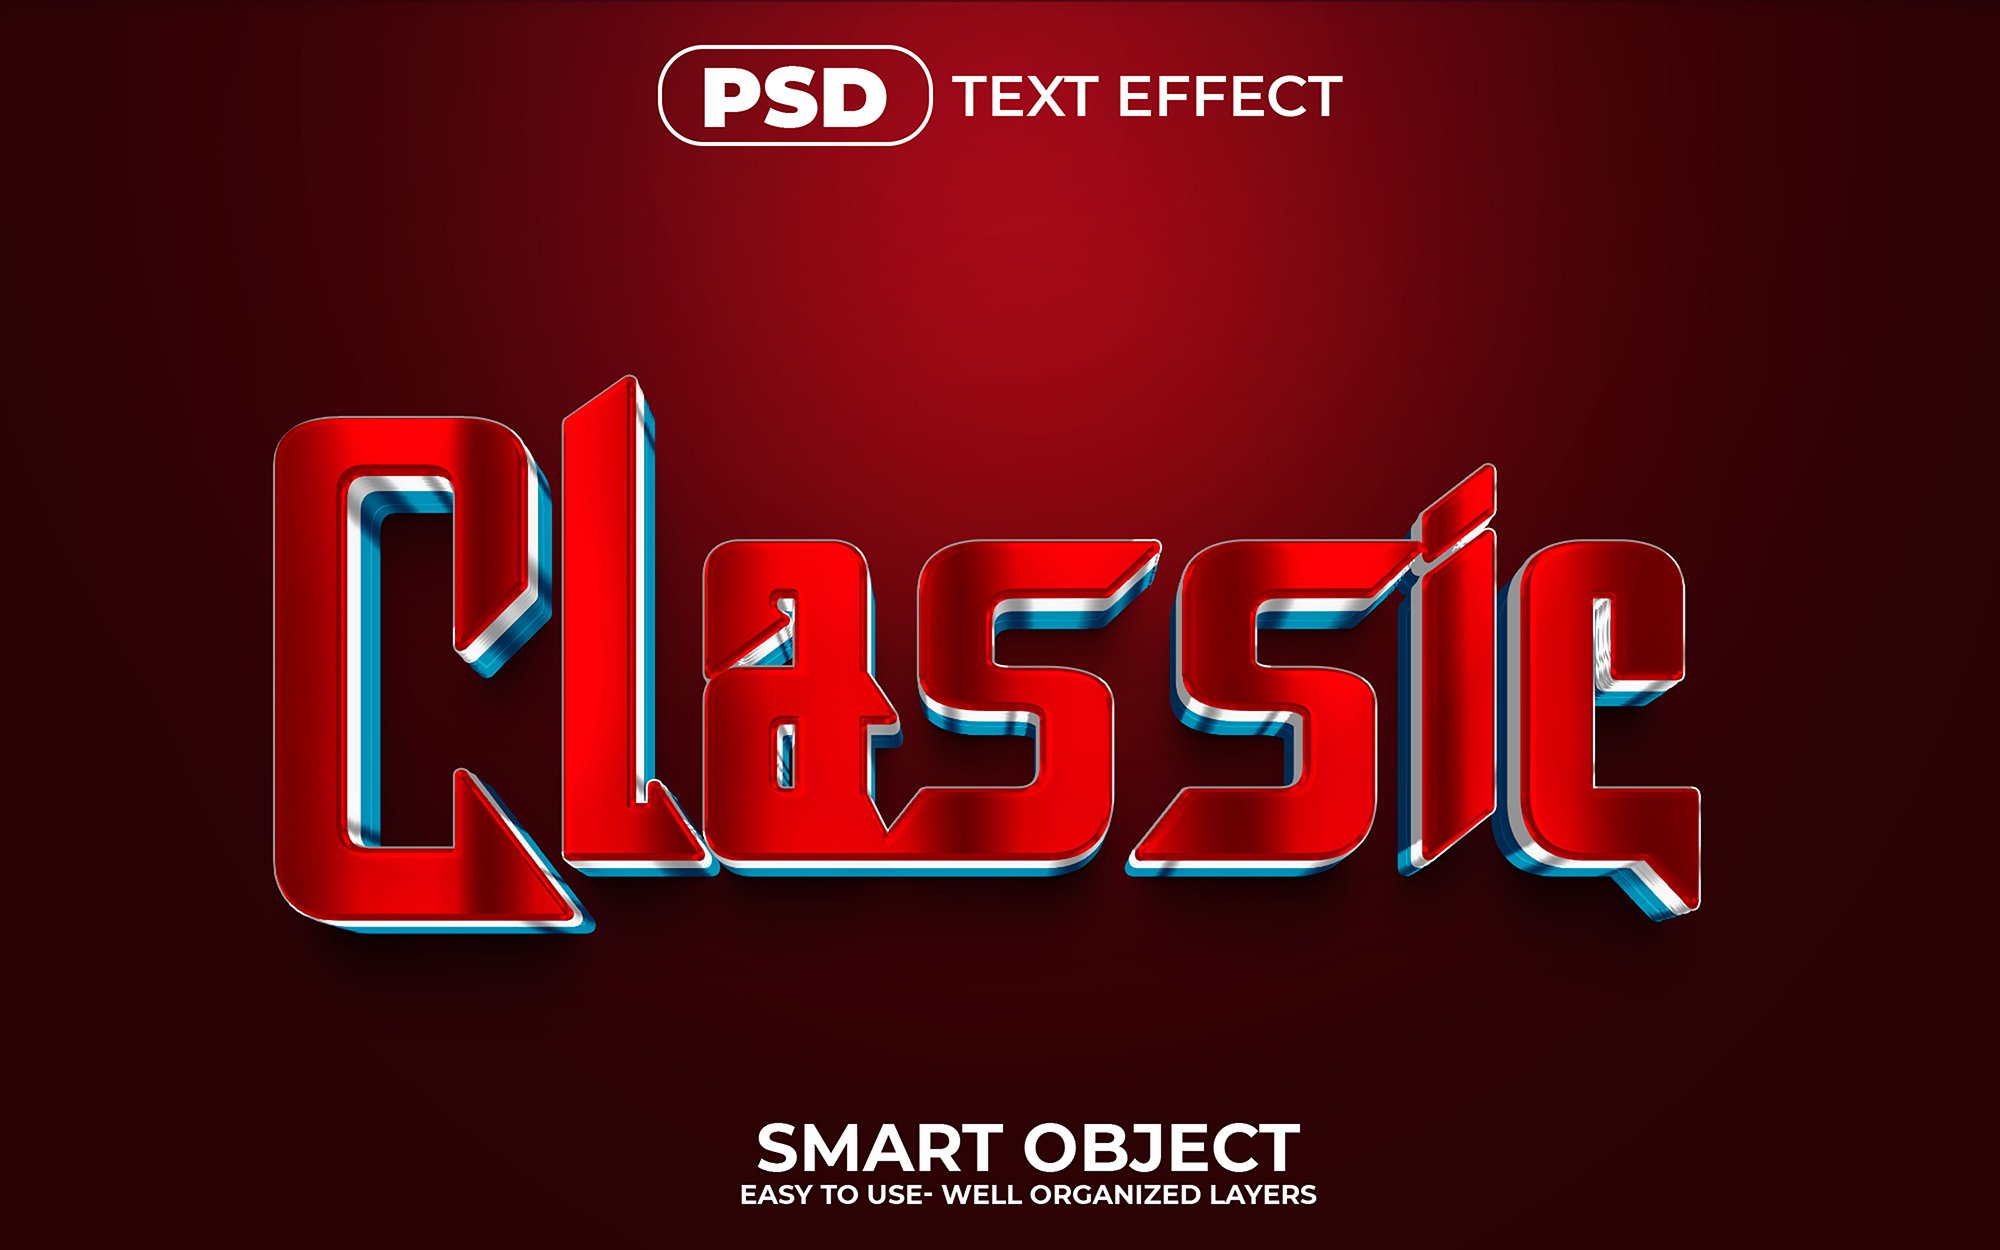 Classic 3D Editable psd Text Effectcover image.